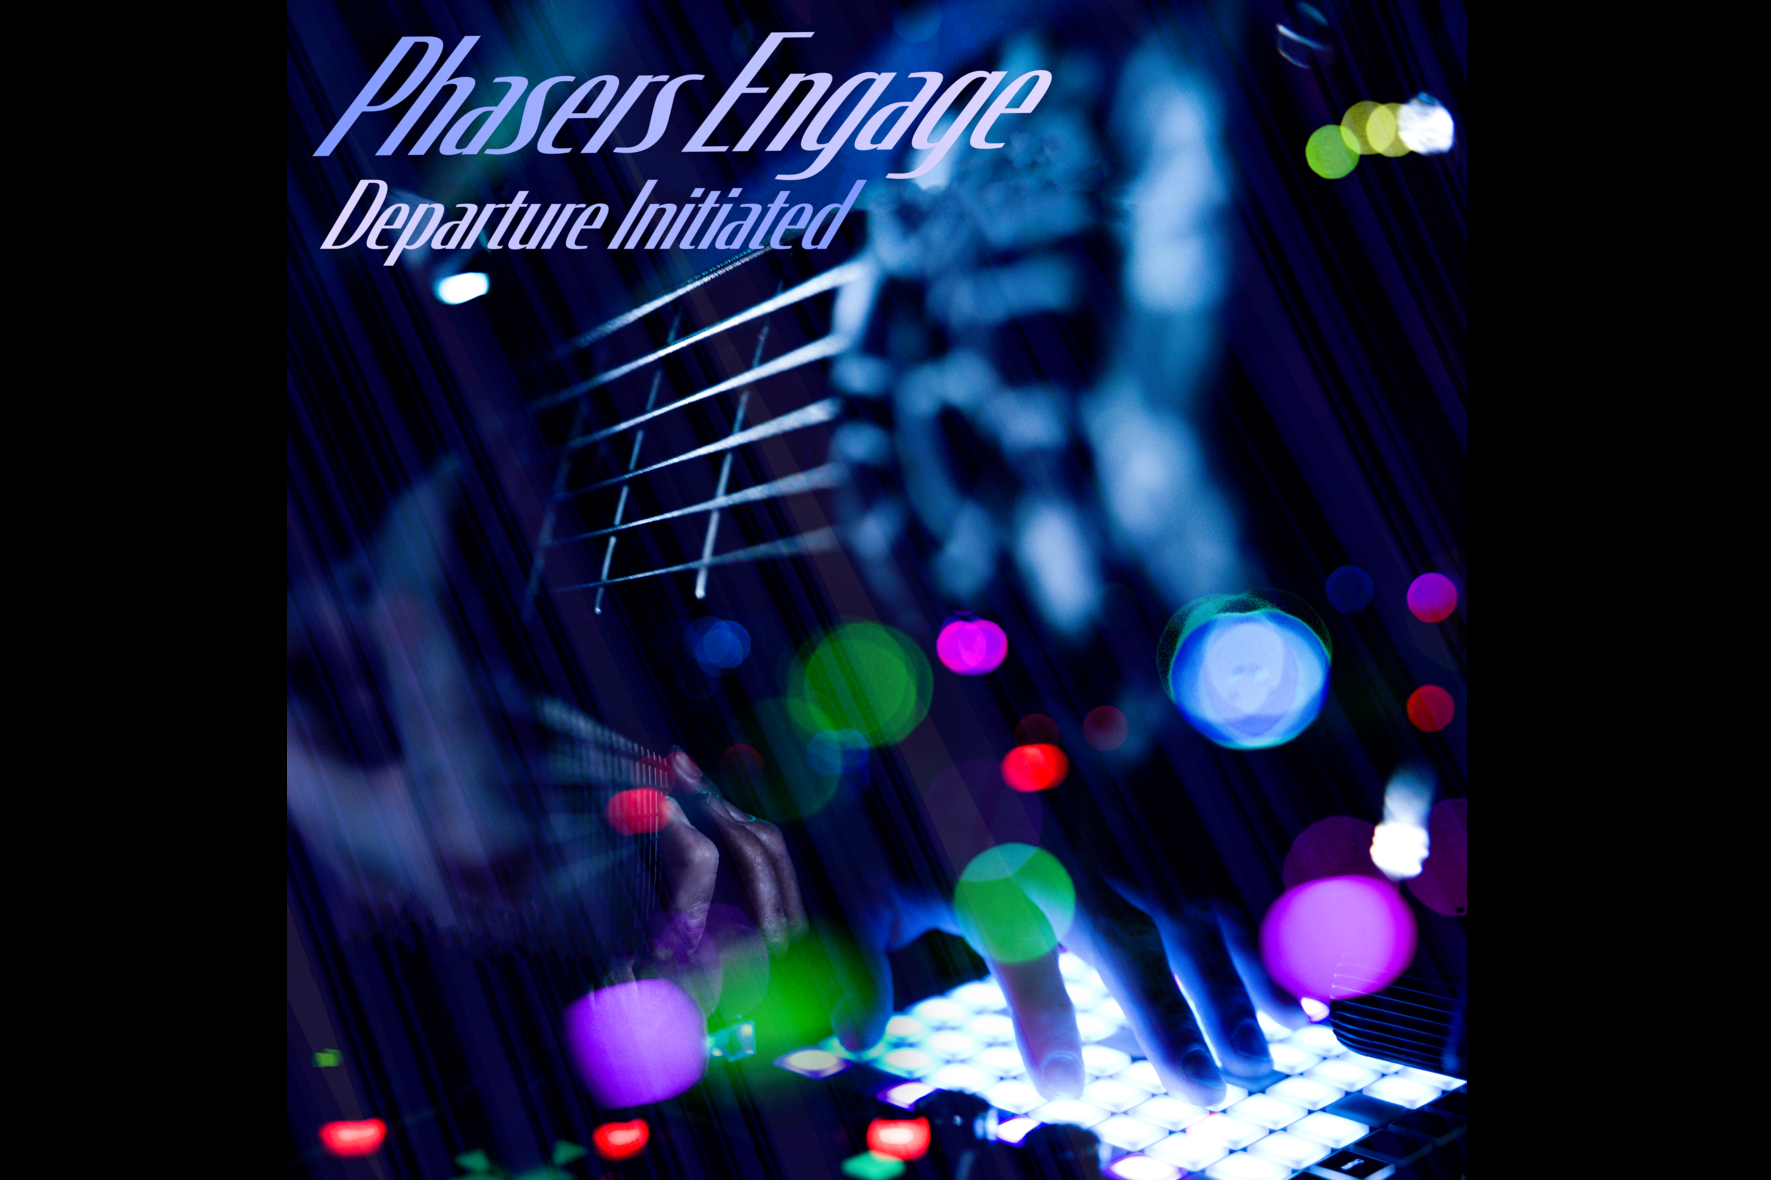 Phasers Engage-Departure Initiated" Album Review